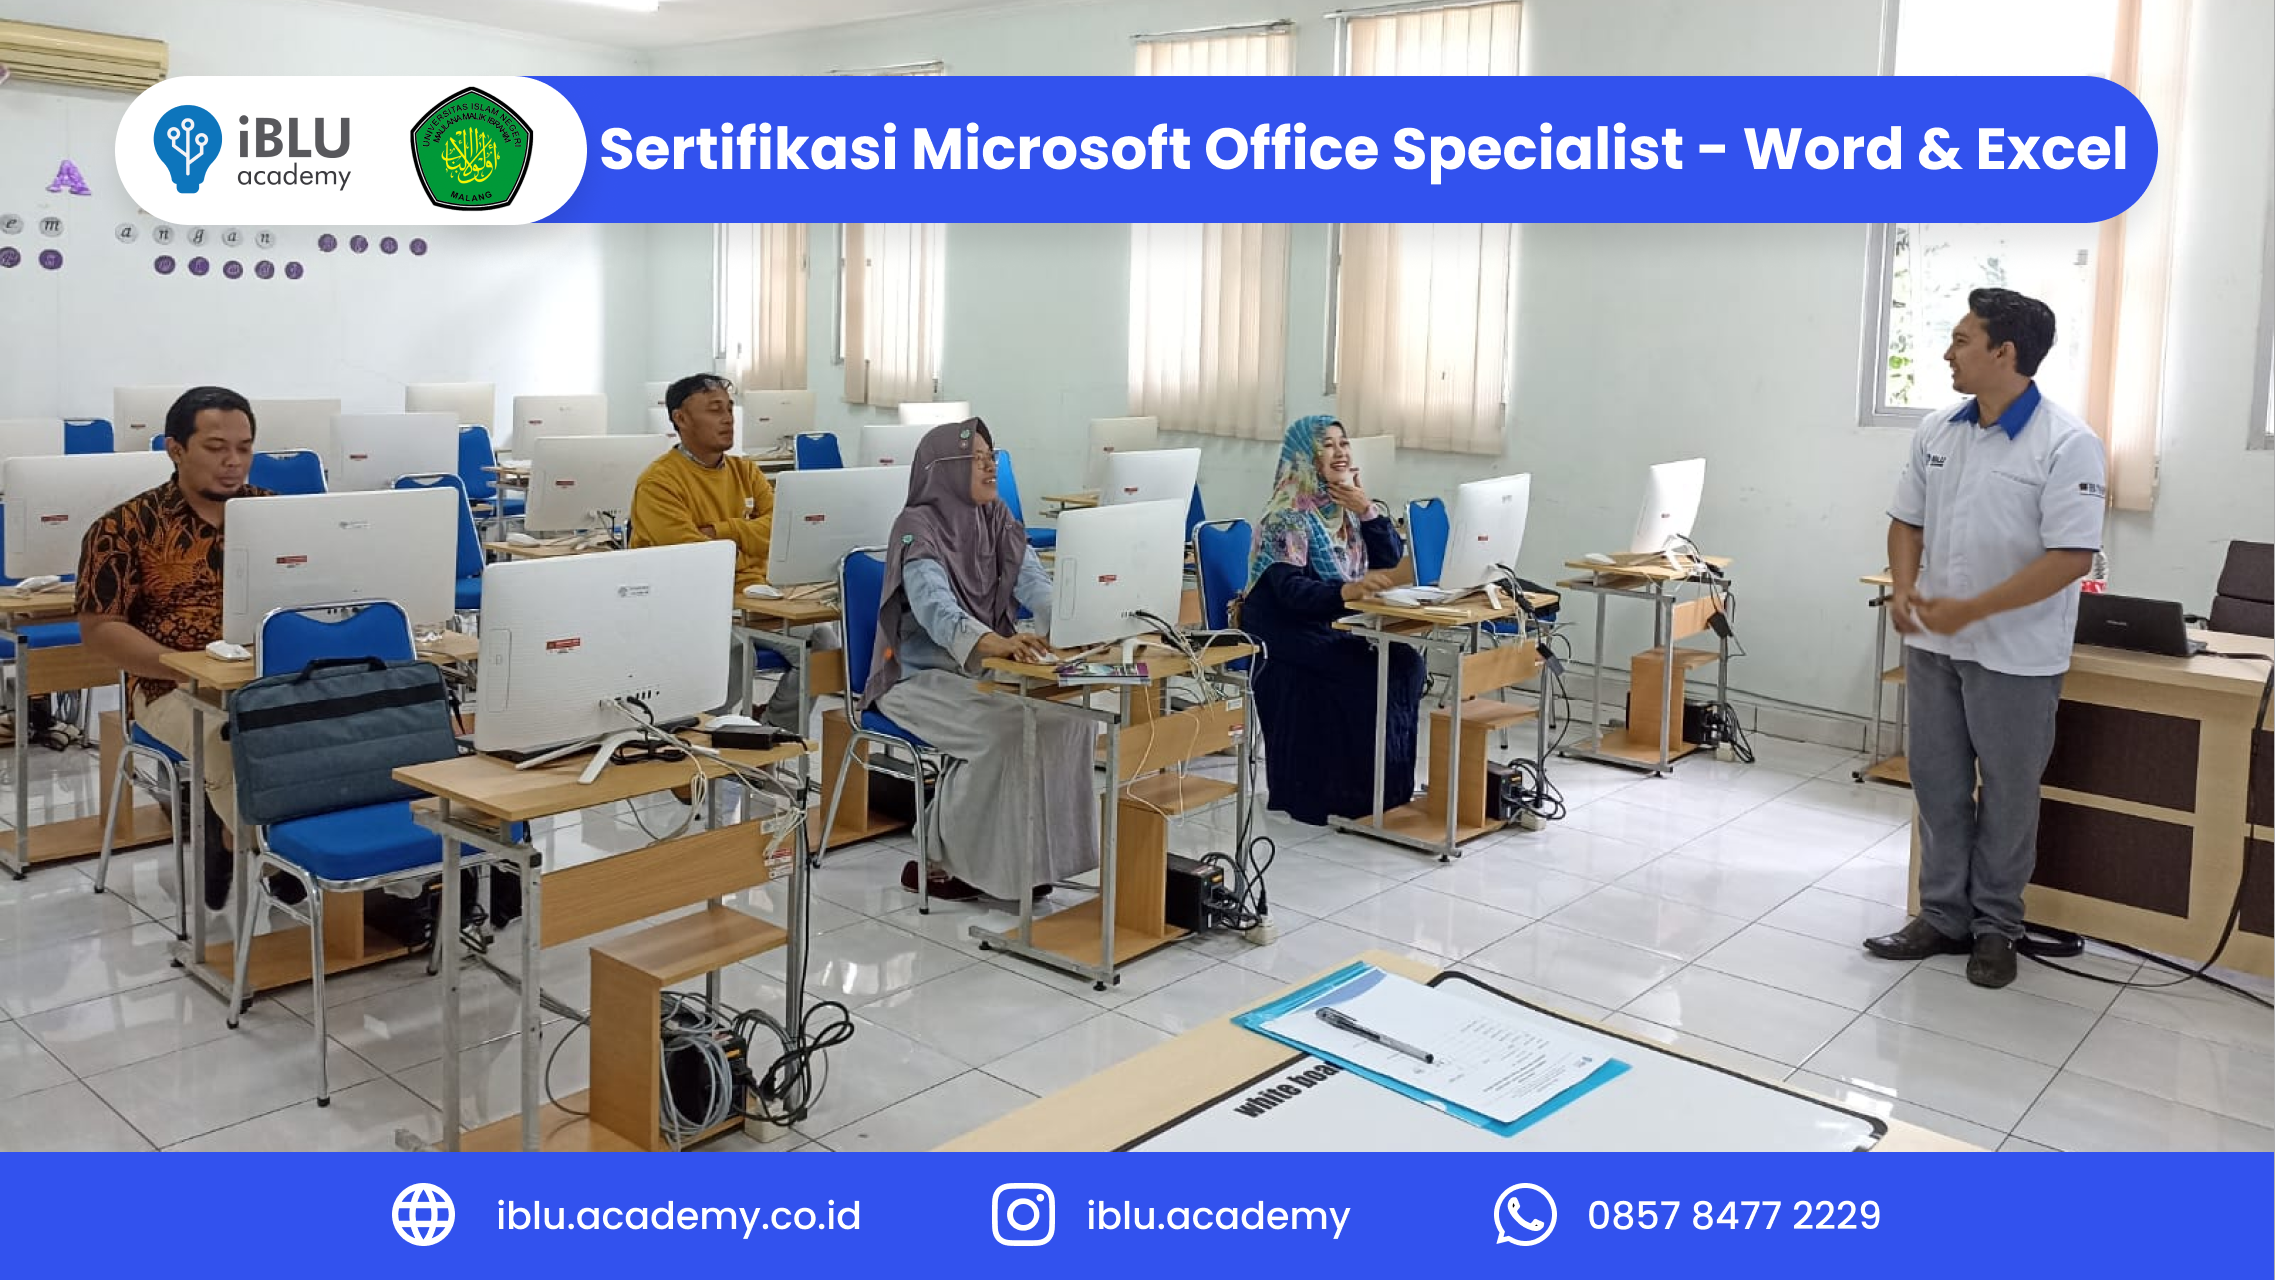 National Certified Microsoft Office